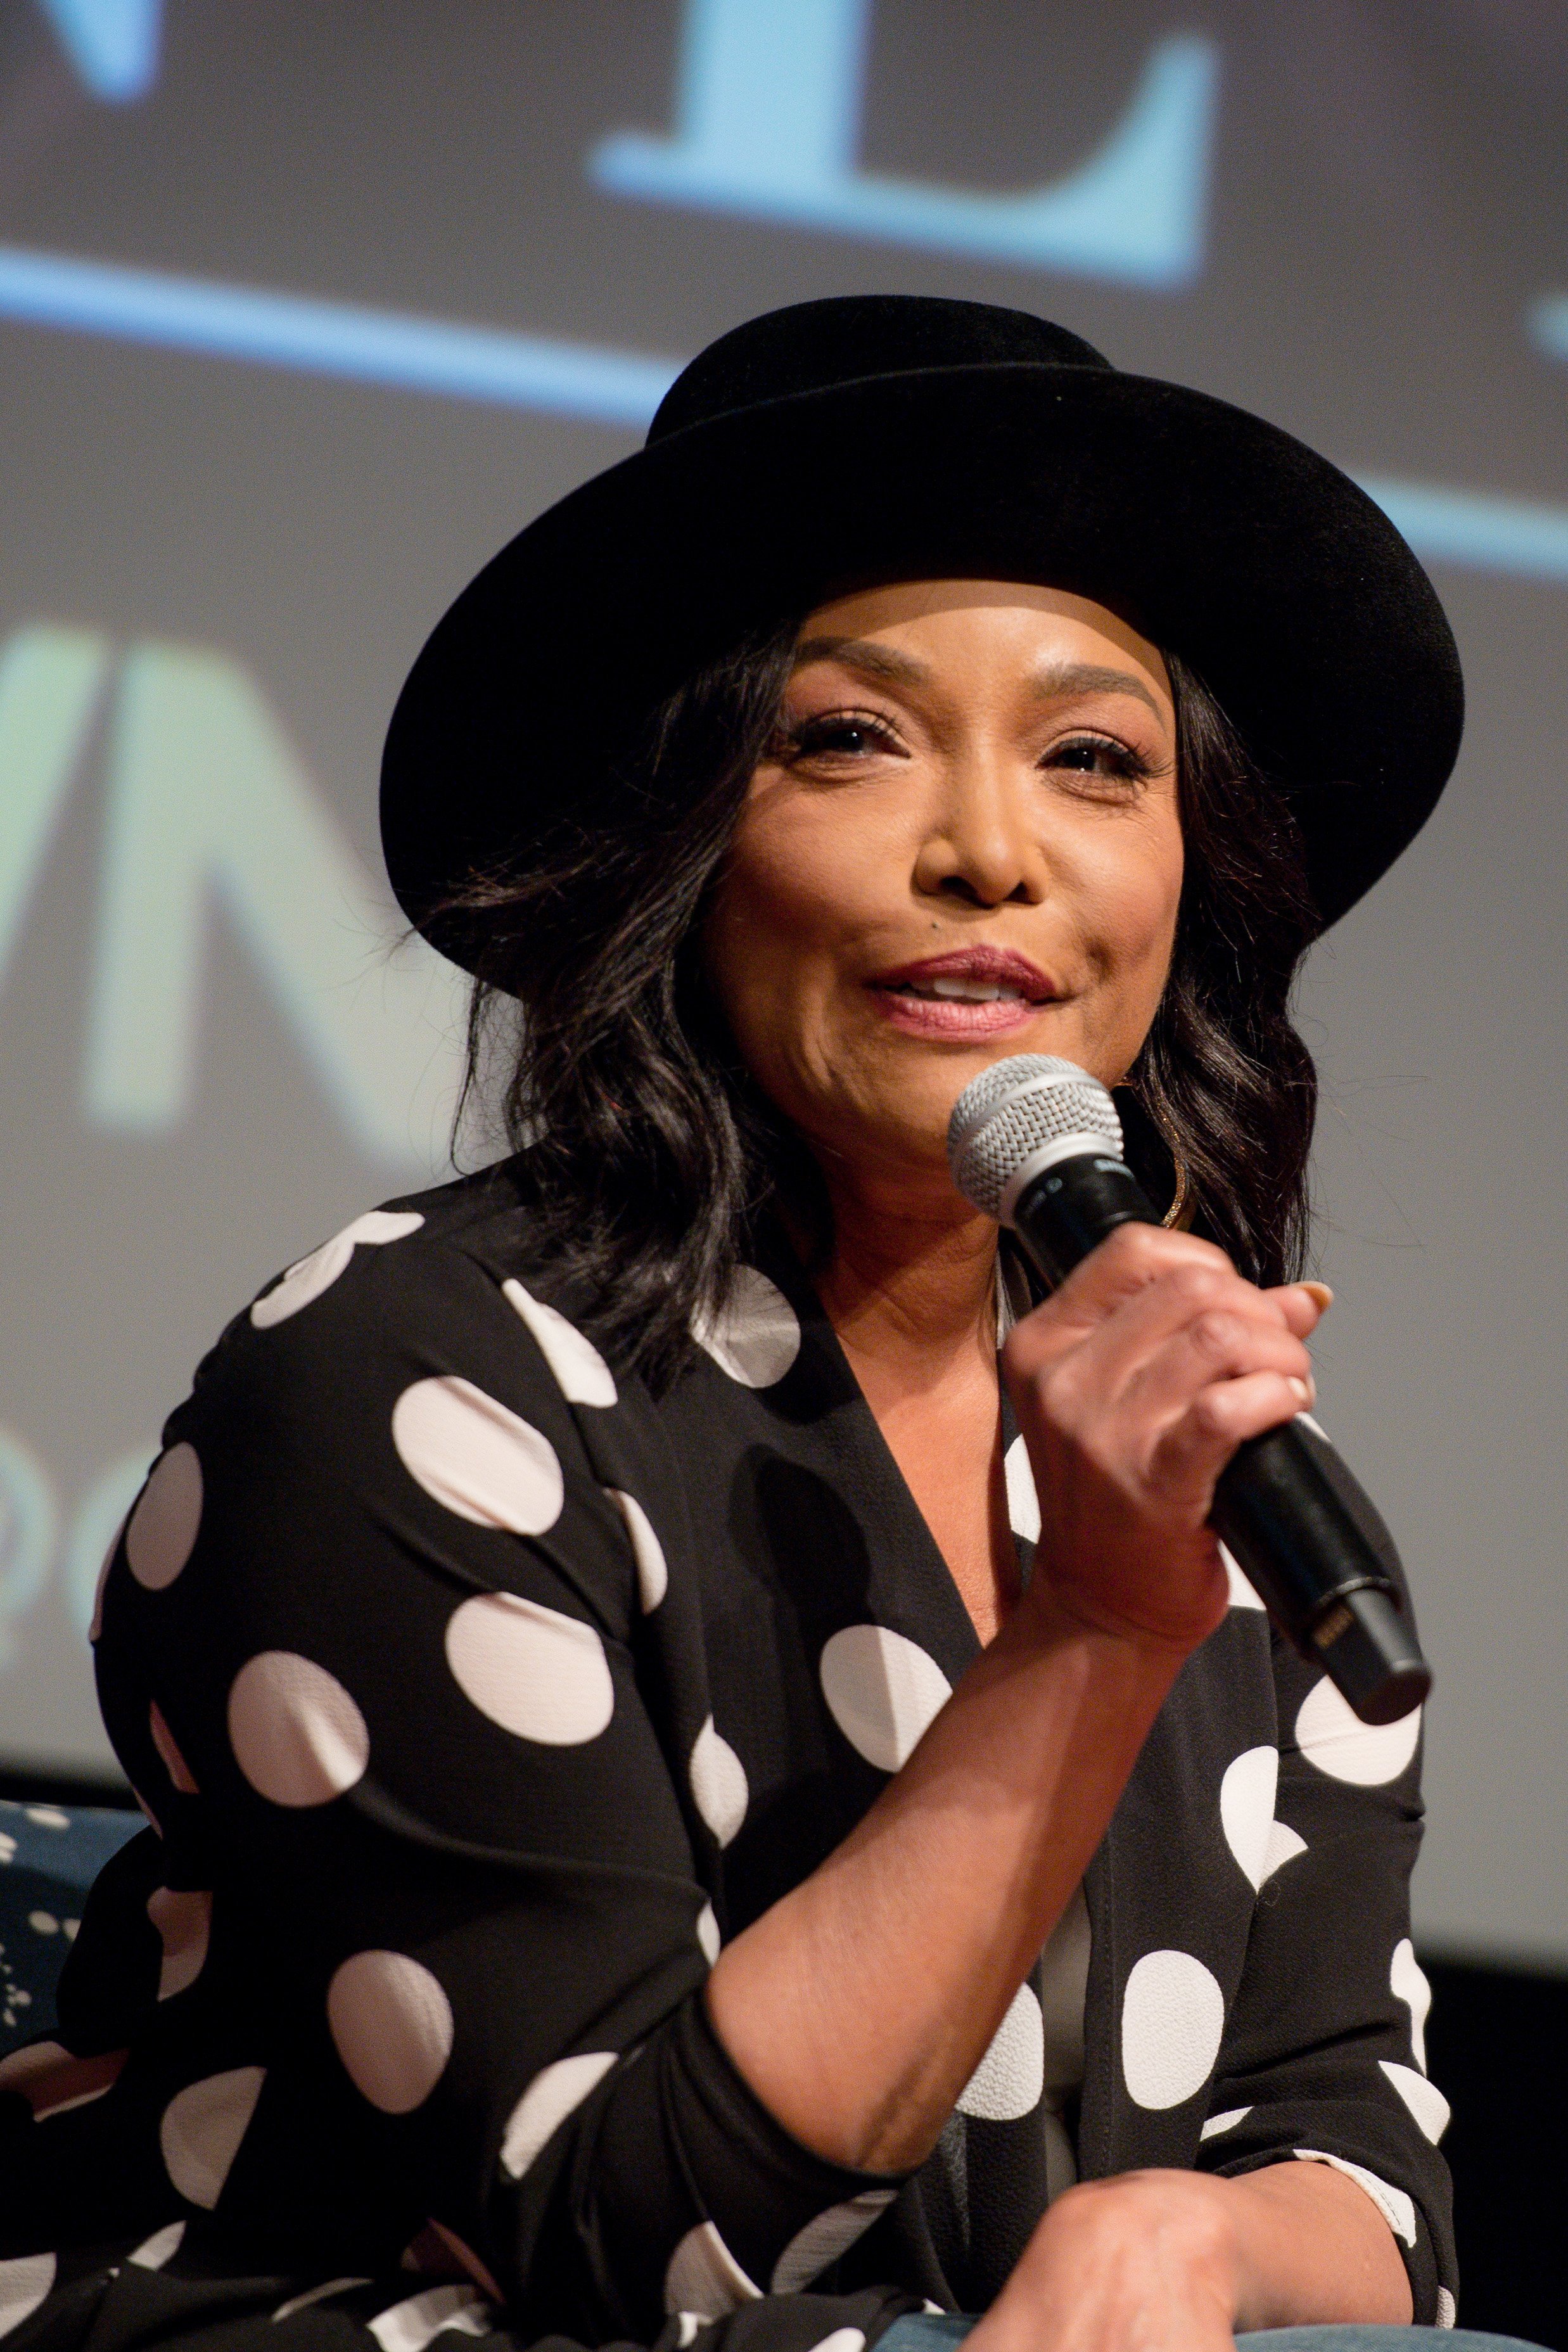 Lynn Whitfield at the "Greenleaf" season 3 premiere Q&A session on August 28, 2018. | Photo: Getty Images